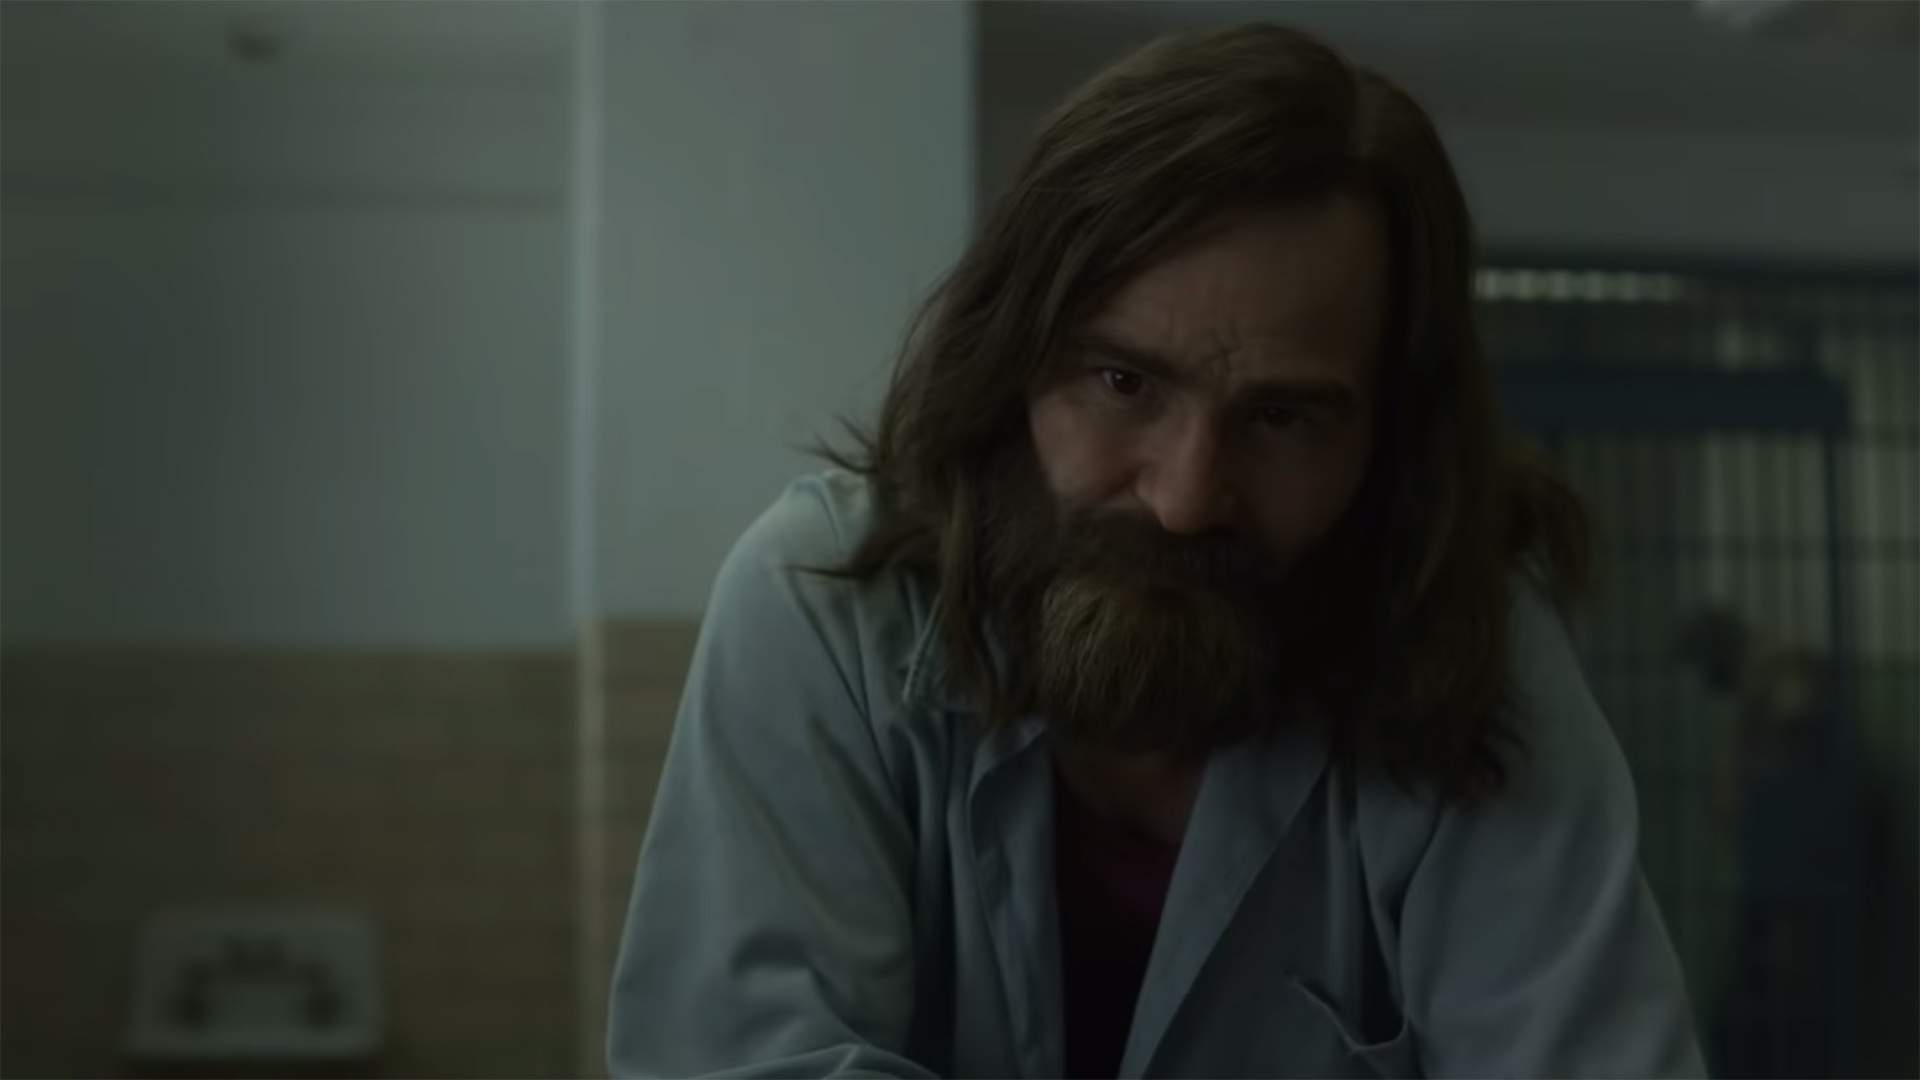 The Menacing First Trailer for 'Mindhunter' Season Two Has Creepy Masks and Charles Manson